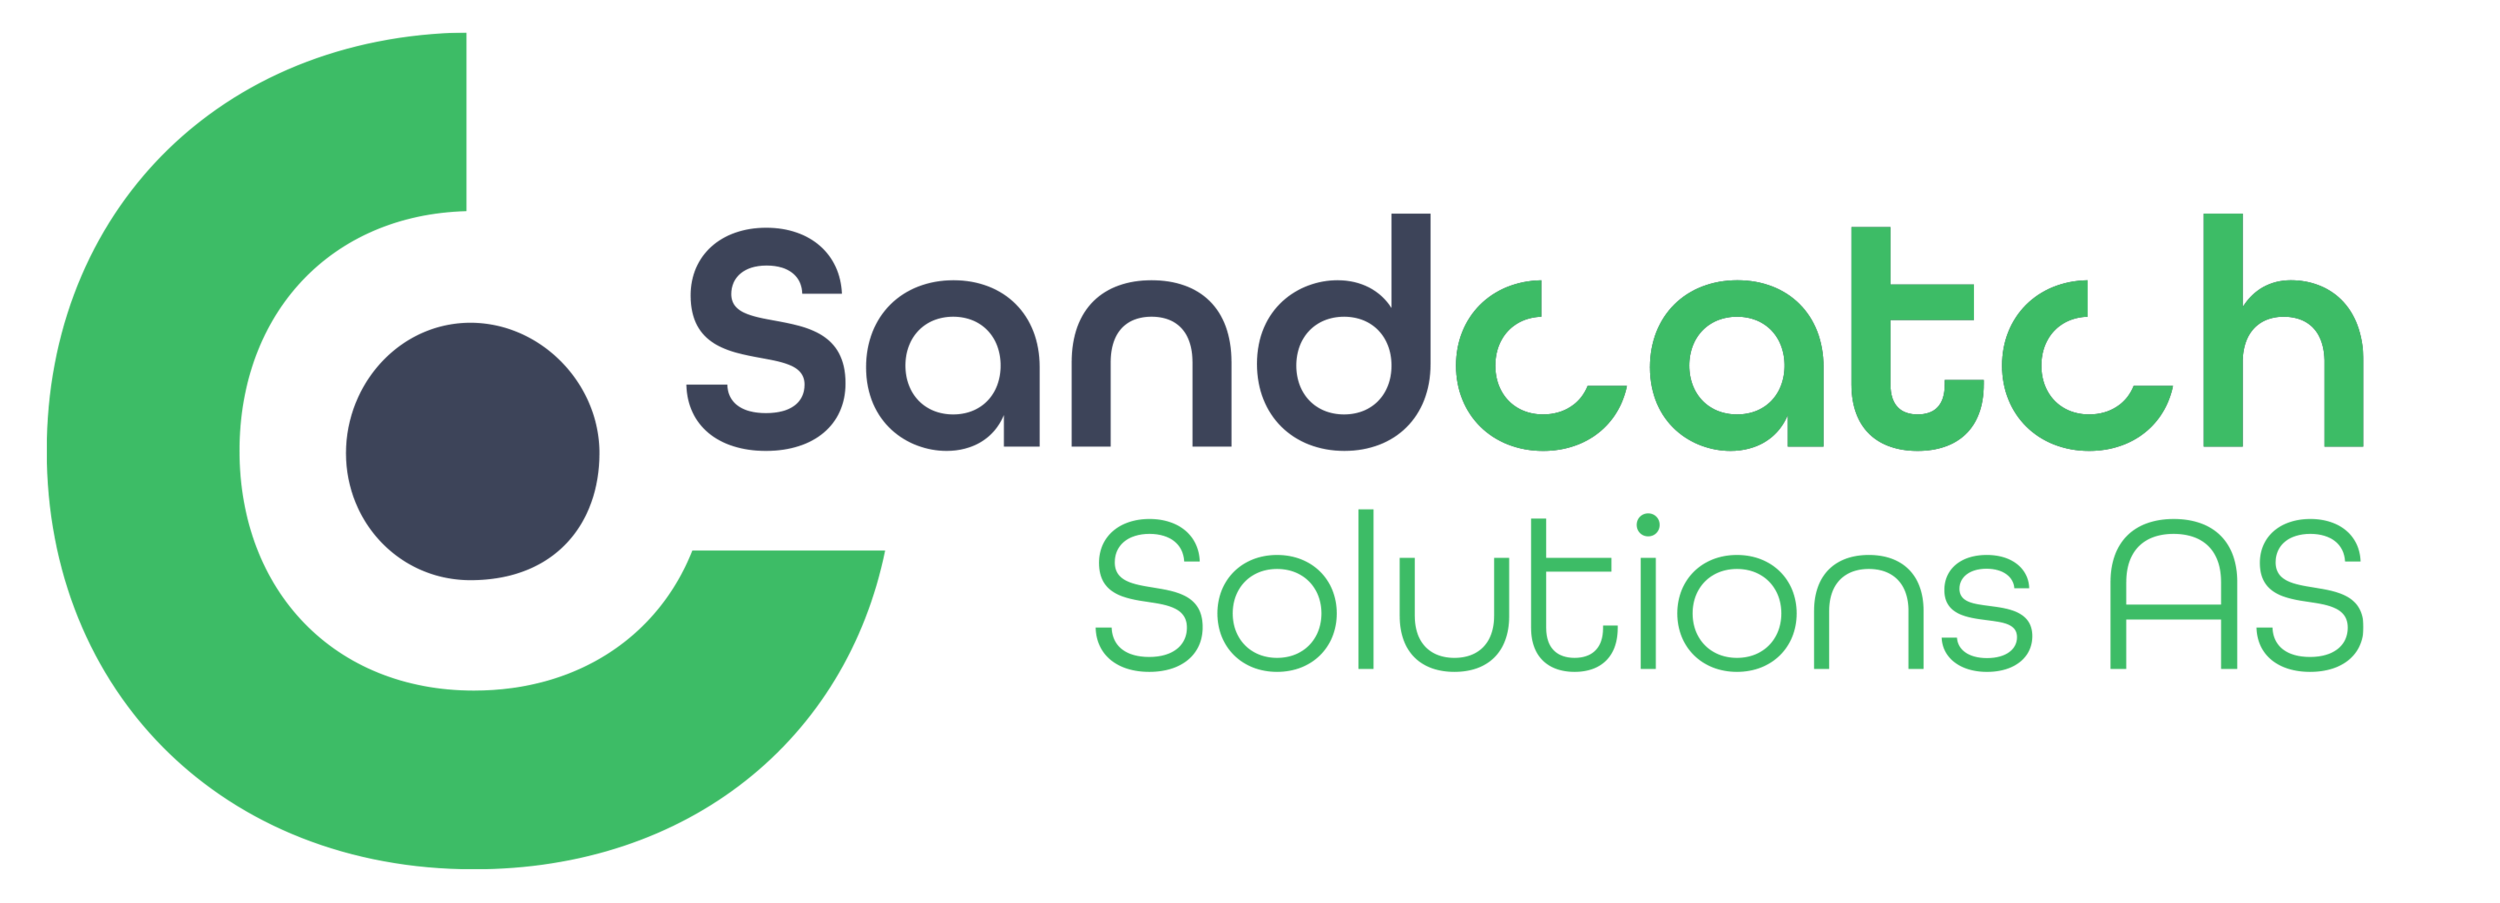 Sandcatch Solutions AS